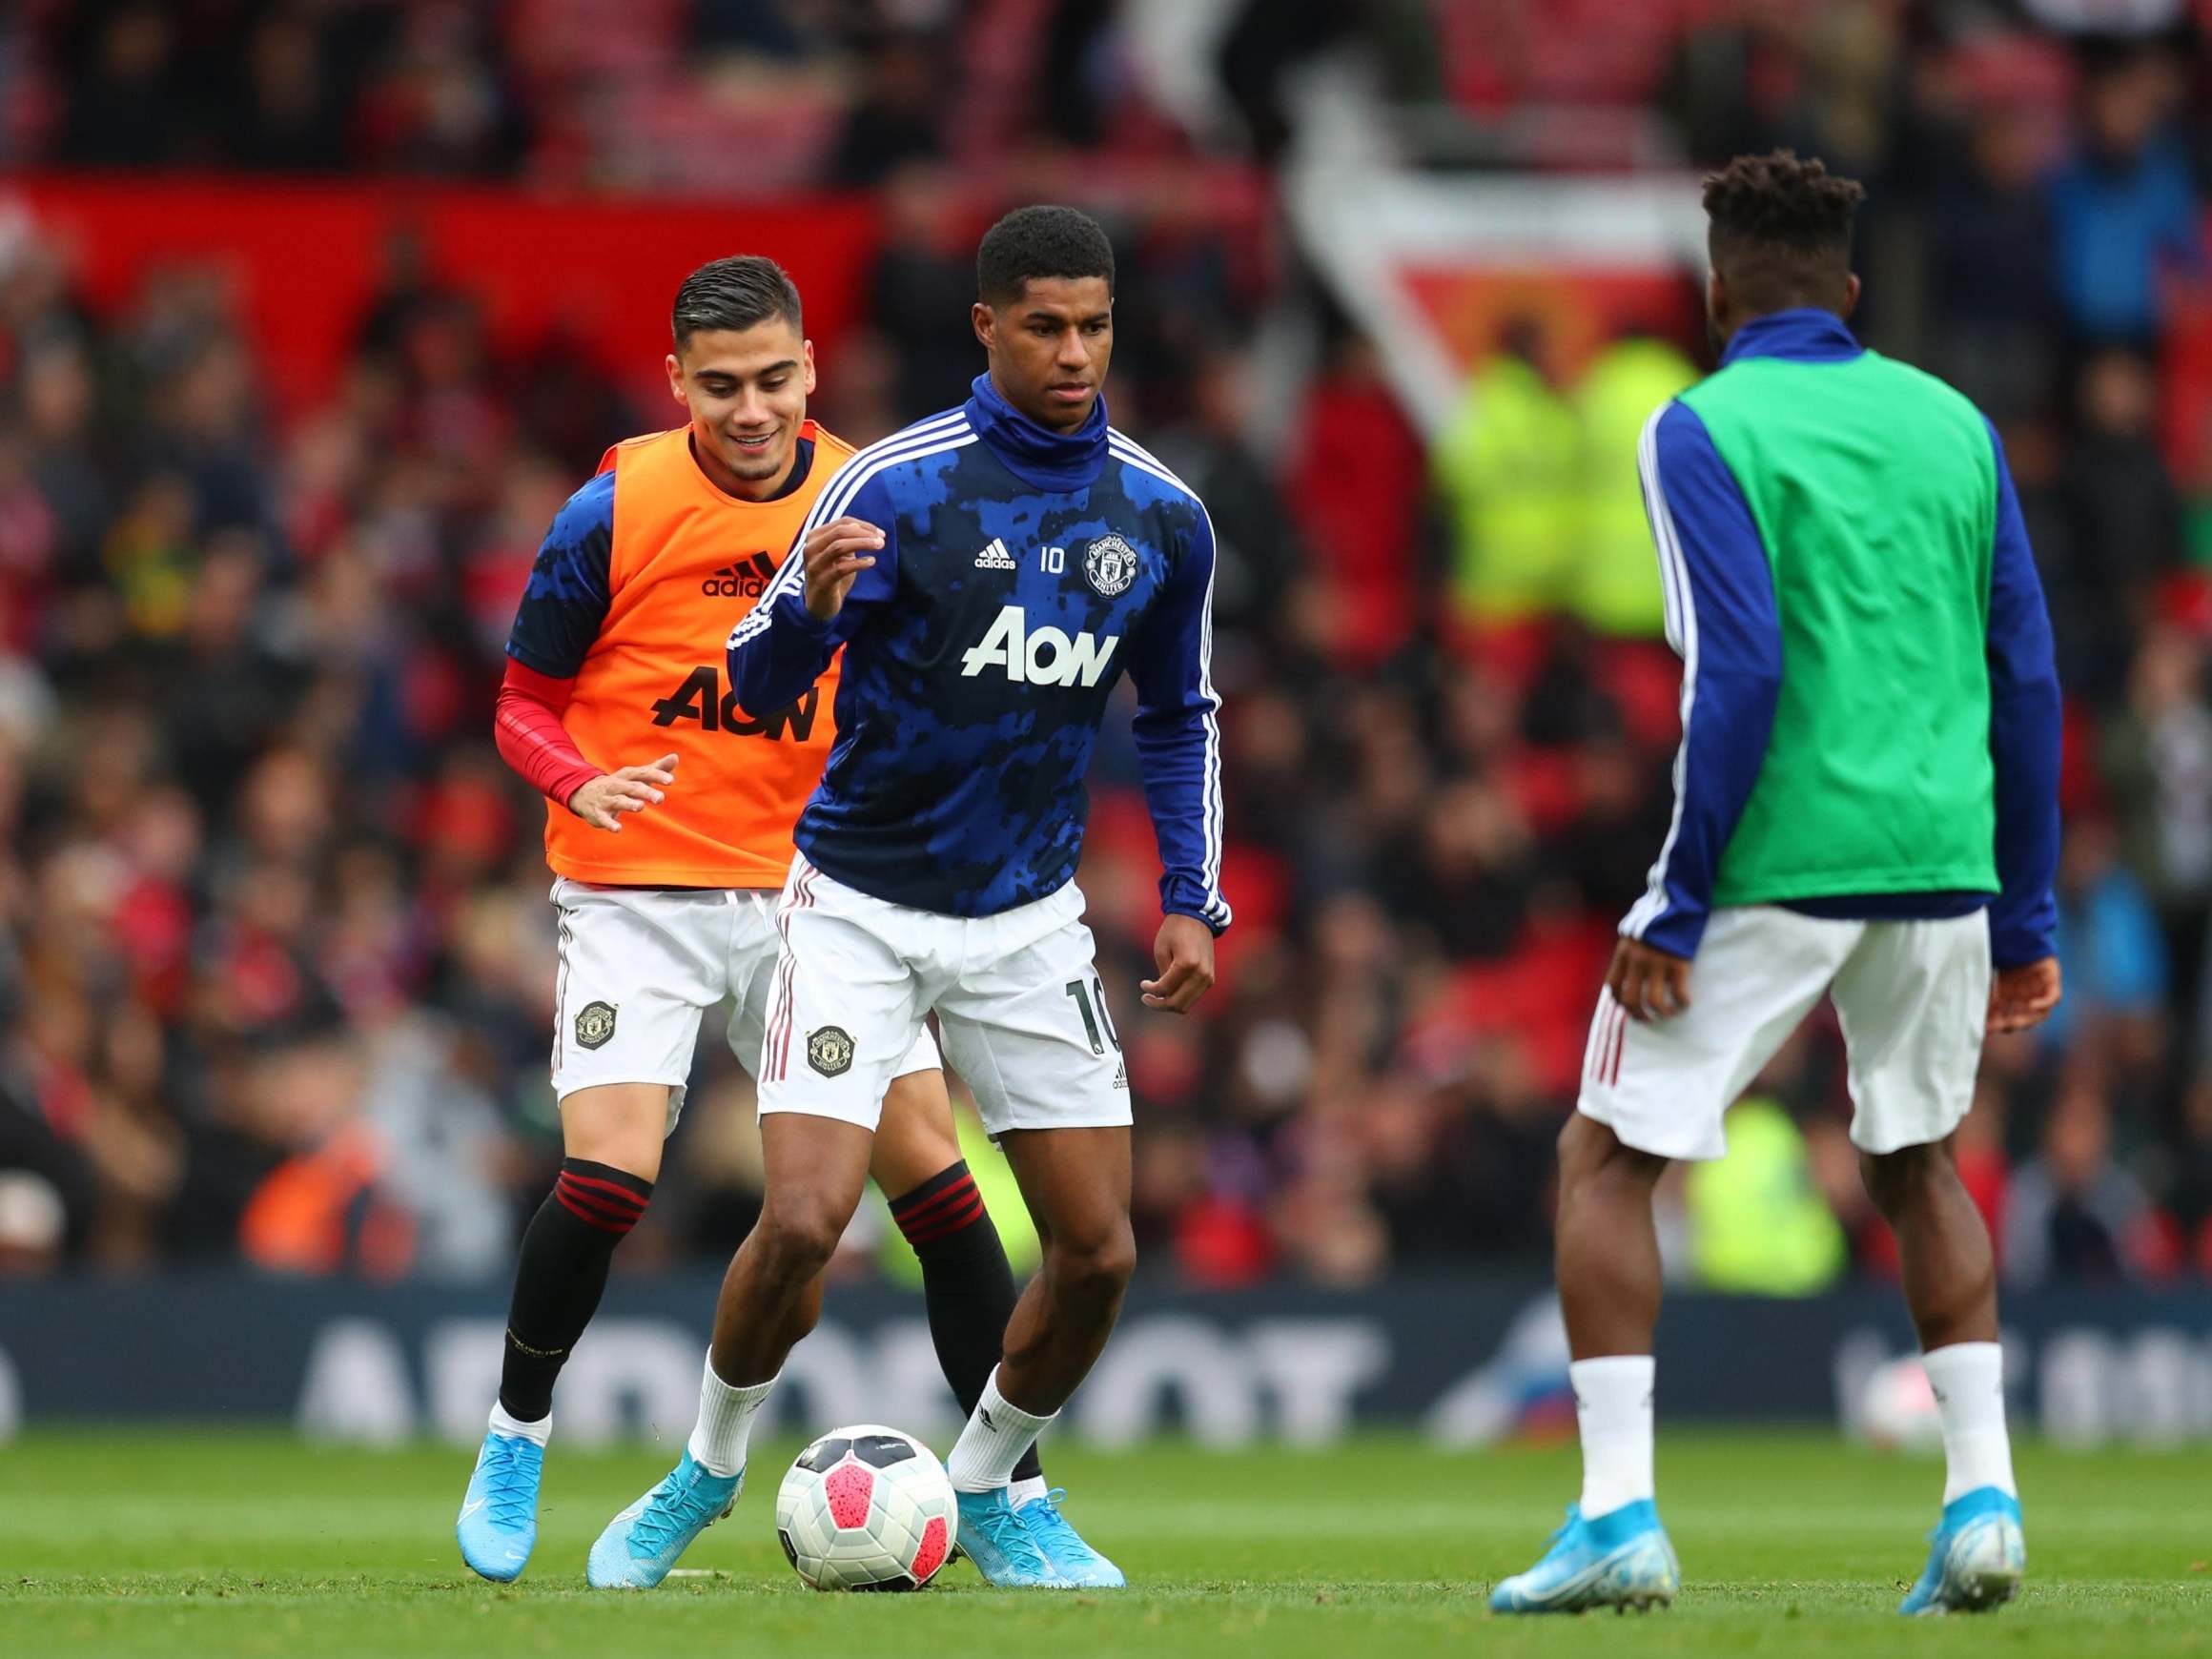 Manchester United vs Liverpool team news: Axel Tuanzebe injured in warm-up with Marcos Rojo to replace him